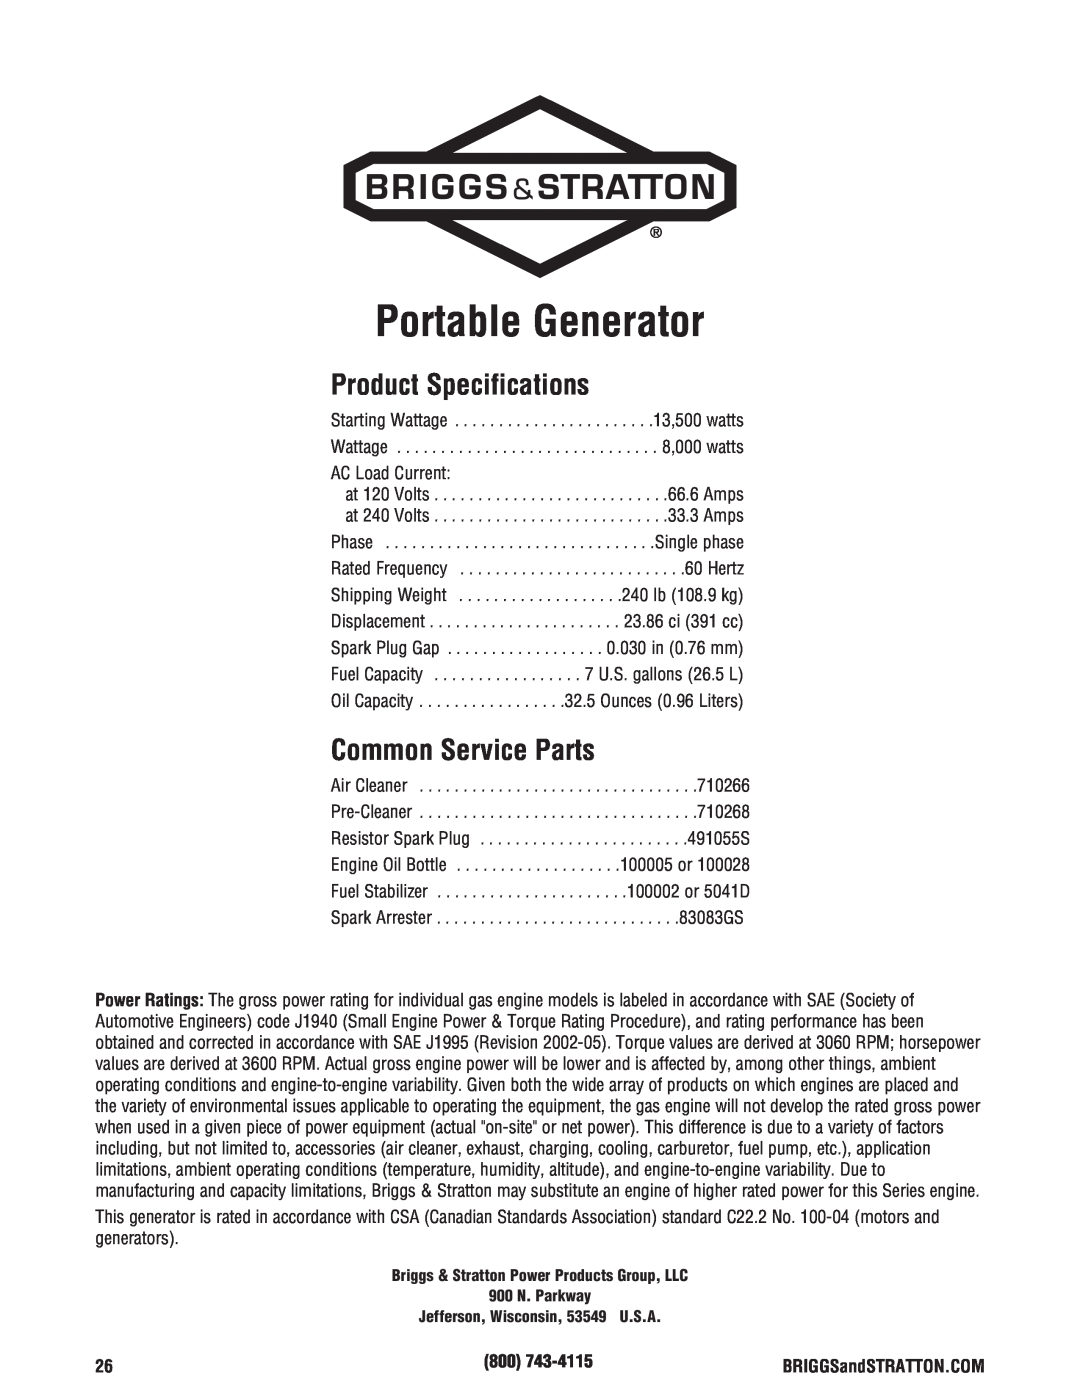 Briggs & Stratton 206405GS manual Portable Generator, Product Specifications, Common Service Parts 